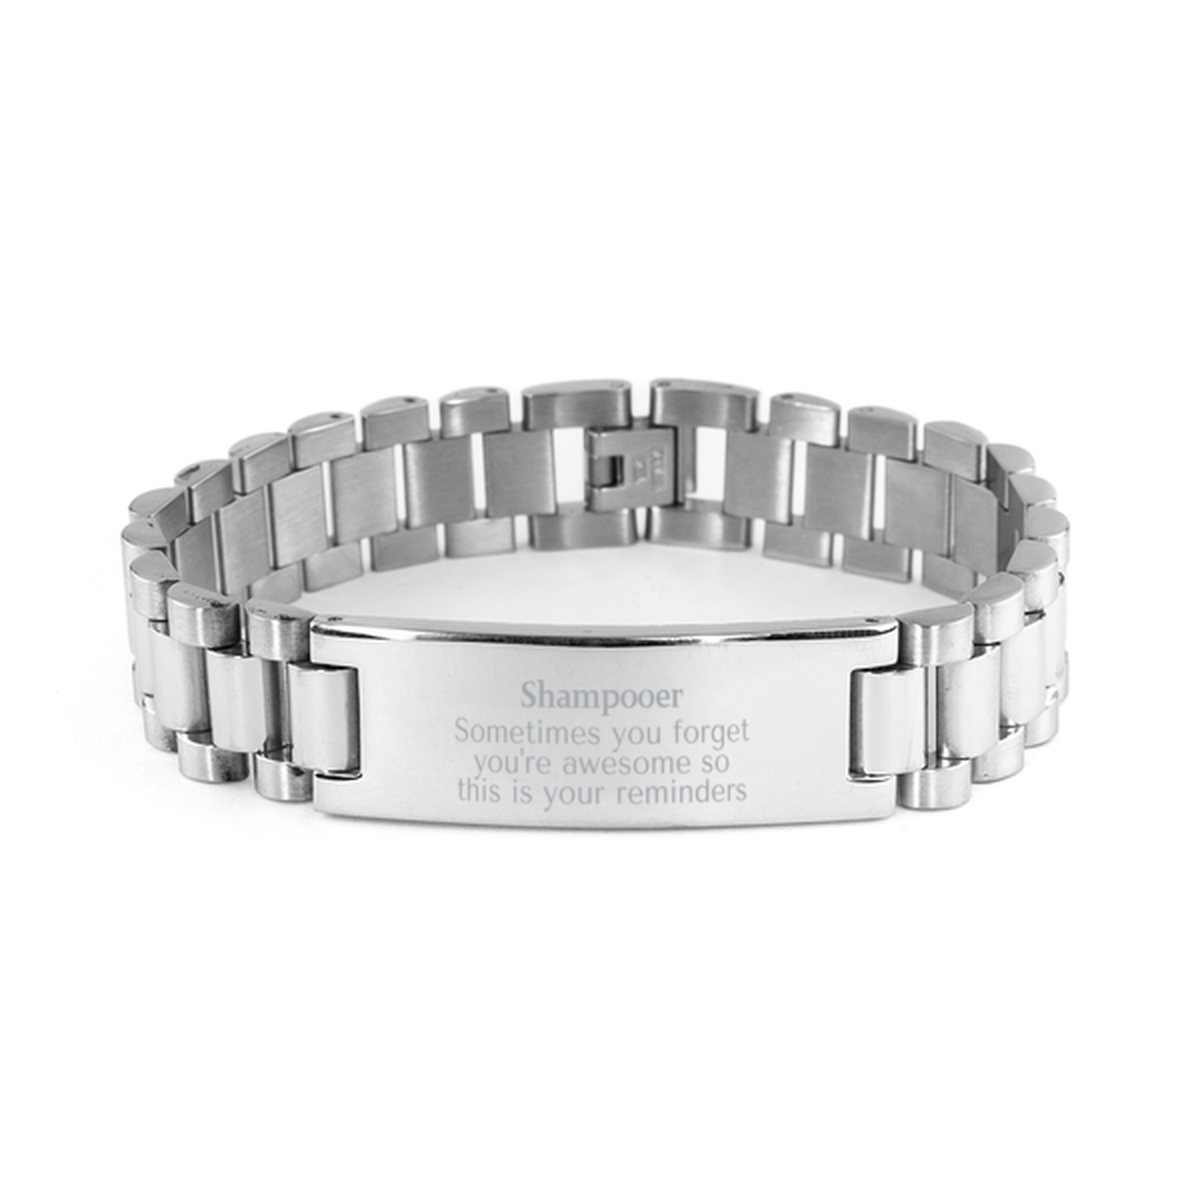 Sentimental Shampooer Ladder Stainless Steel Bracelet, Shampooer Sometimes you forget you're awesome so this is your reminders, Graduation Christmas Birthday Gifts for Shampooer, Men, Women, Coworkers